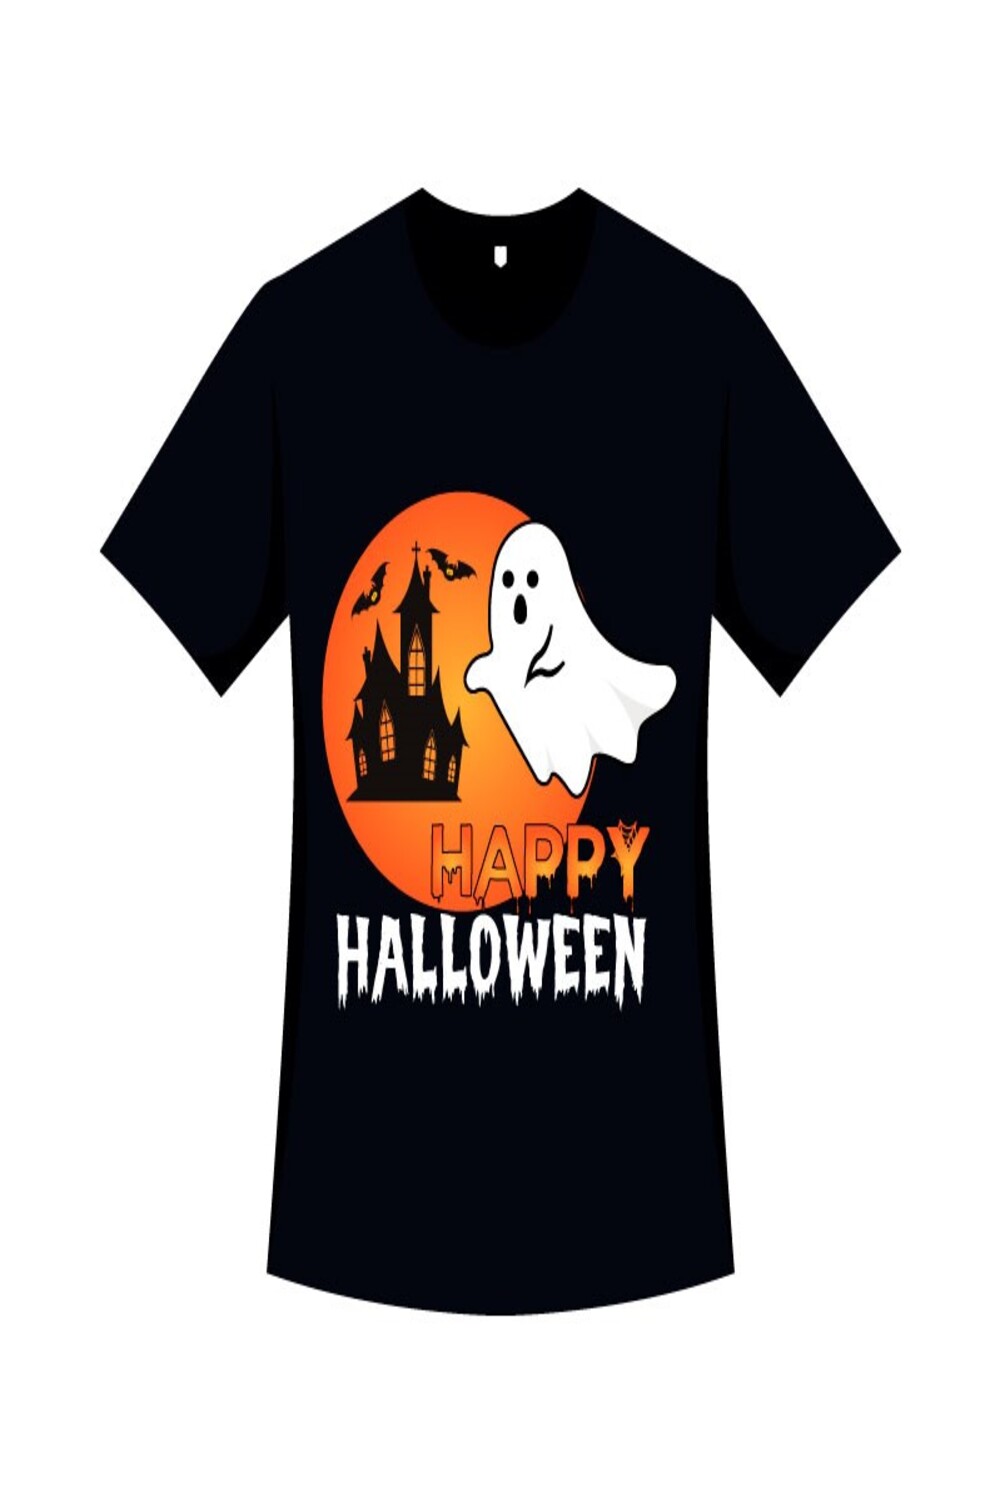 Black t-shirt with a ghost and an old house in an orange circle.